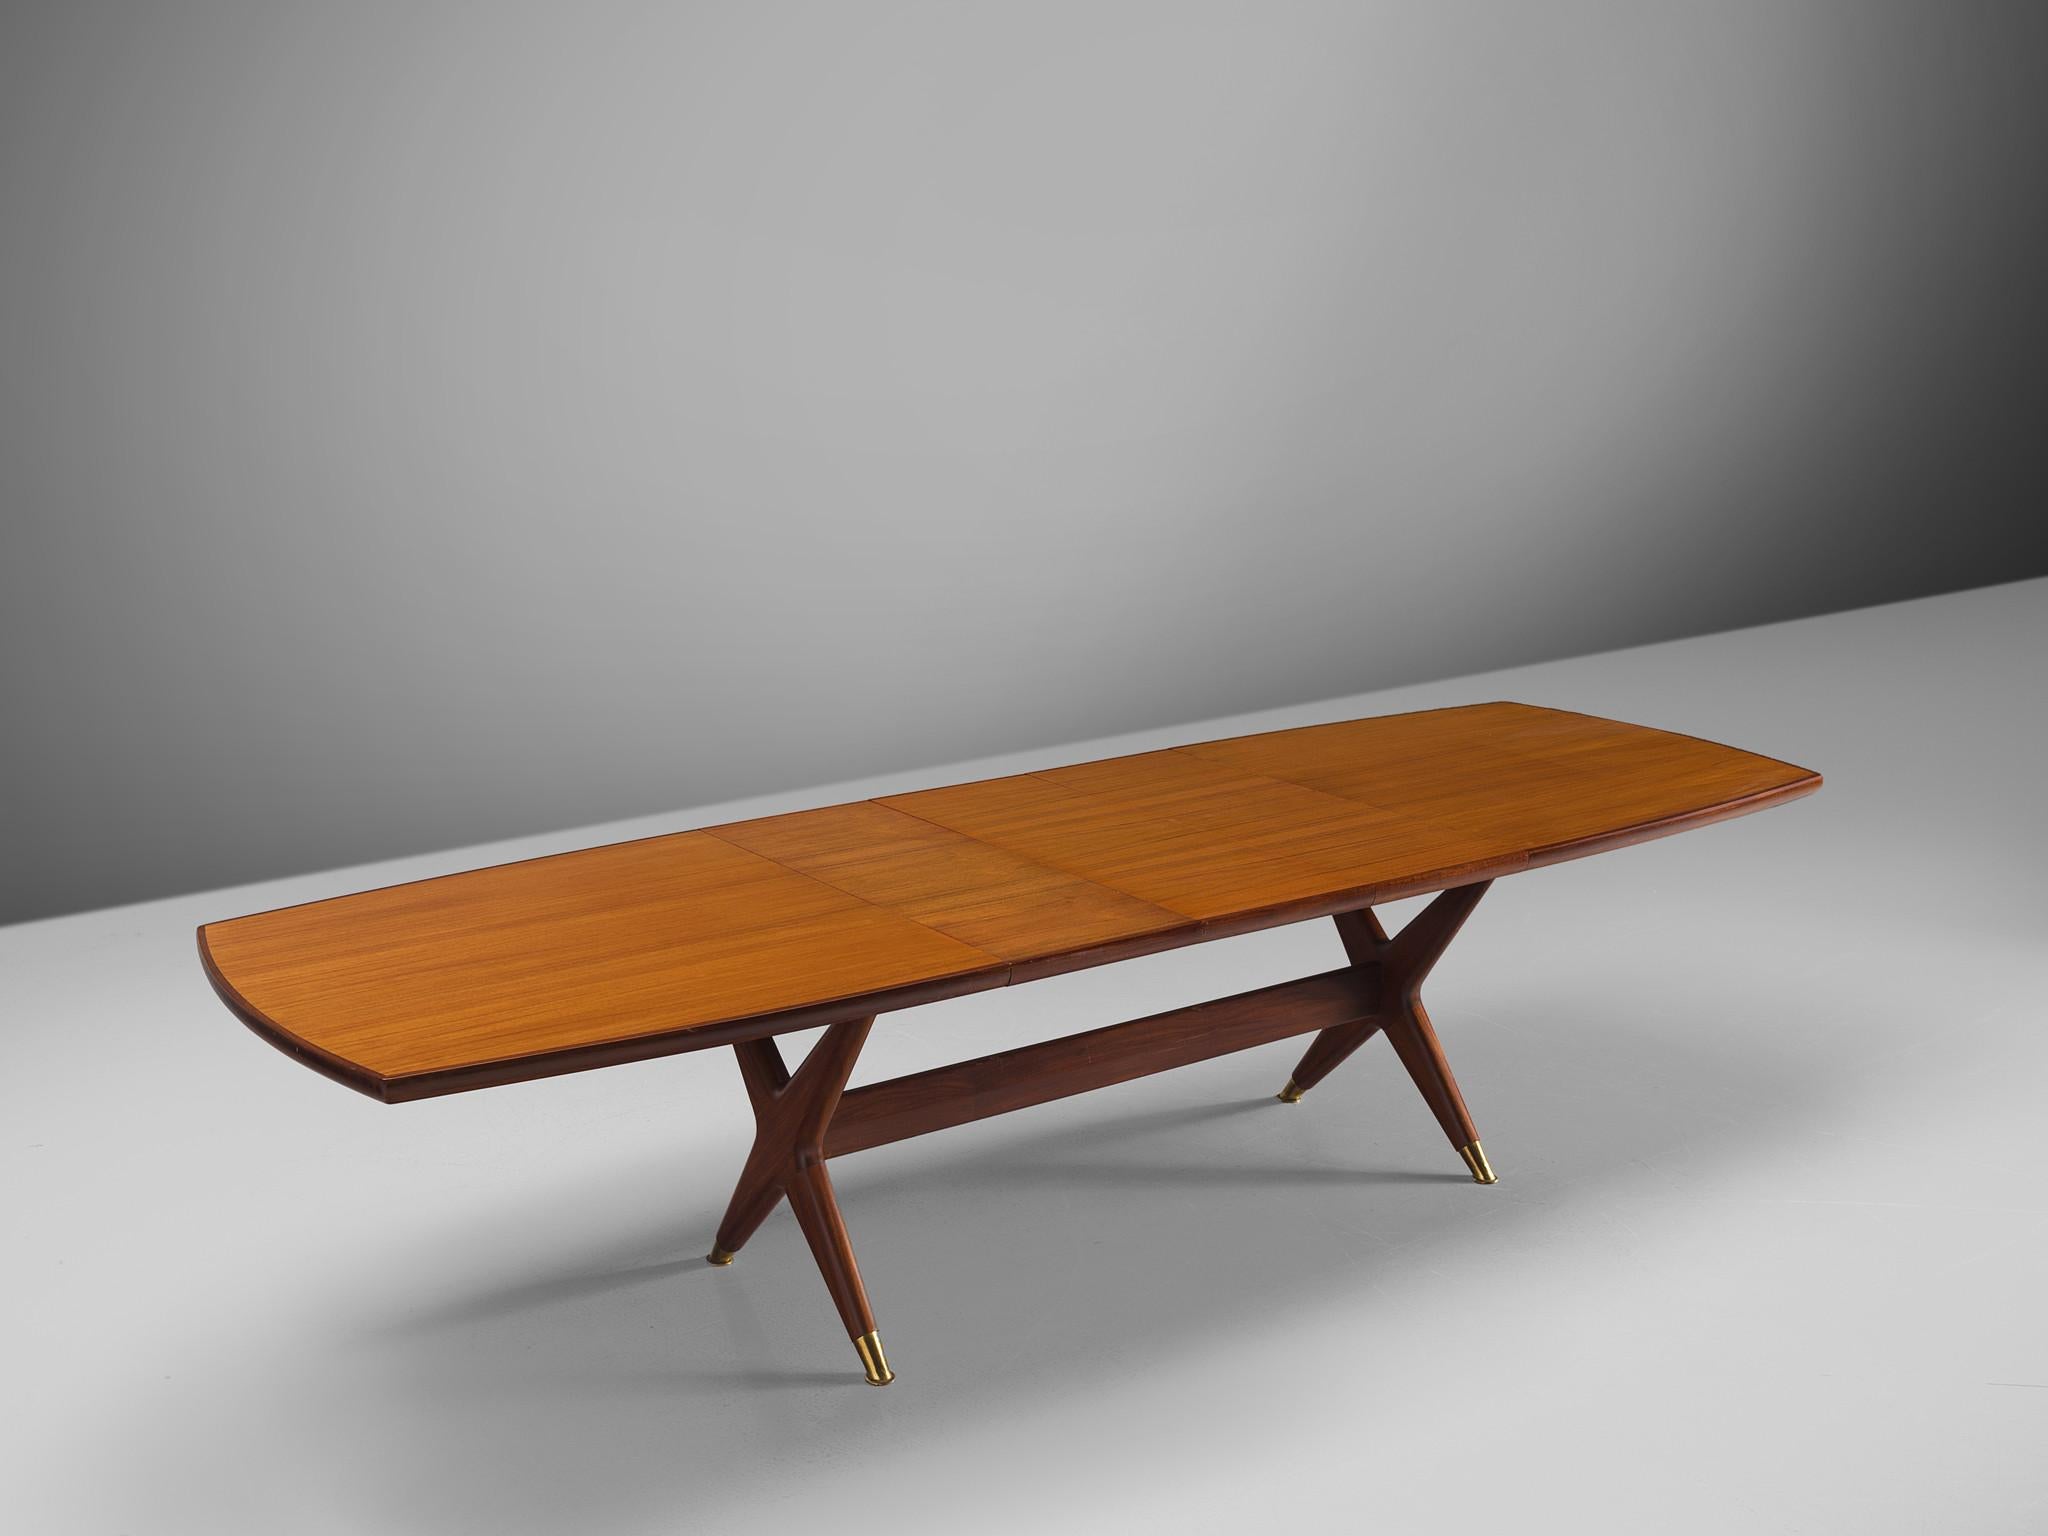 Fredrik Kayser for Gustav Bahus of Norway, table, teak, mahogany and brass, Norway, 1960s. 

This table goes by the name 'Captain'. The table features a quintessential Danish design with soft lines and natural, honest materials. The top is executed